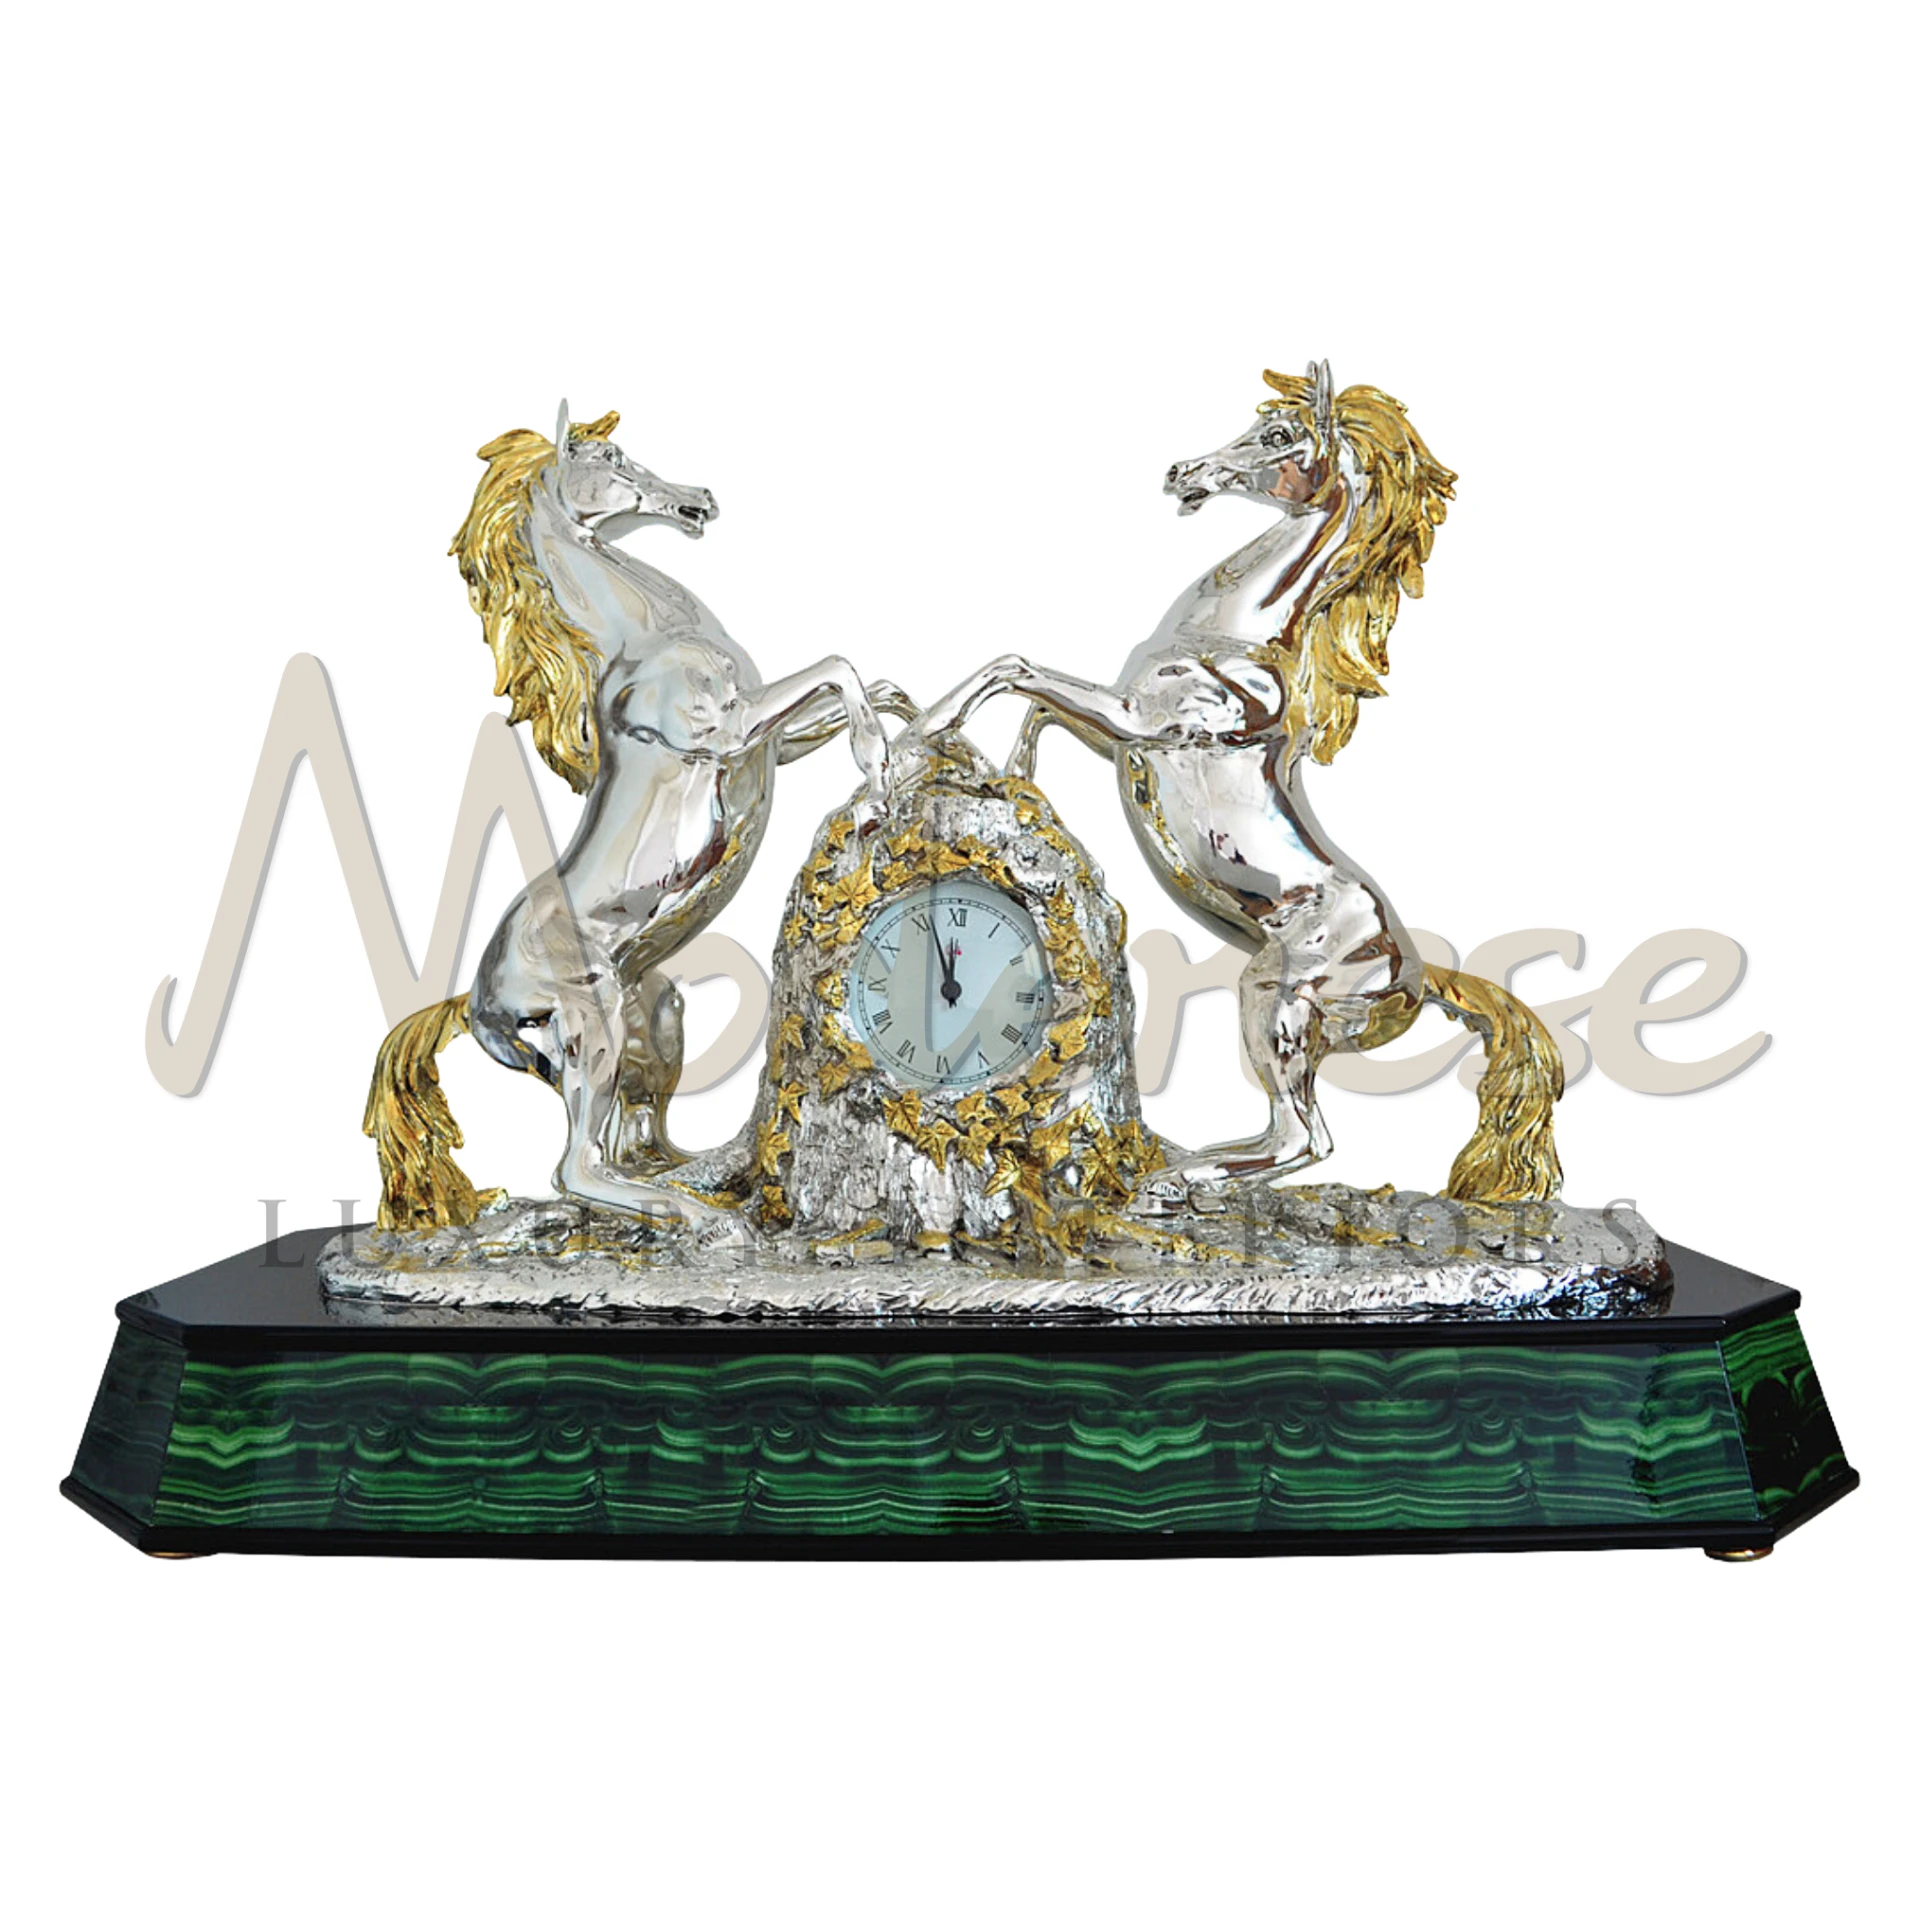 Elegant Silver Horses Table Clock, featuring dynamic horse motifs in silver, captures the essence of movement and elegance in luxury home or office decor.






